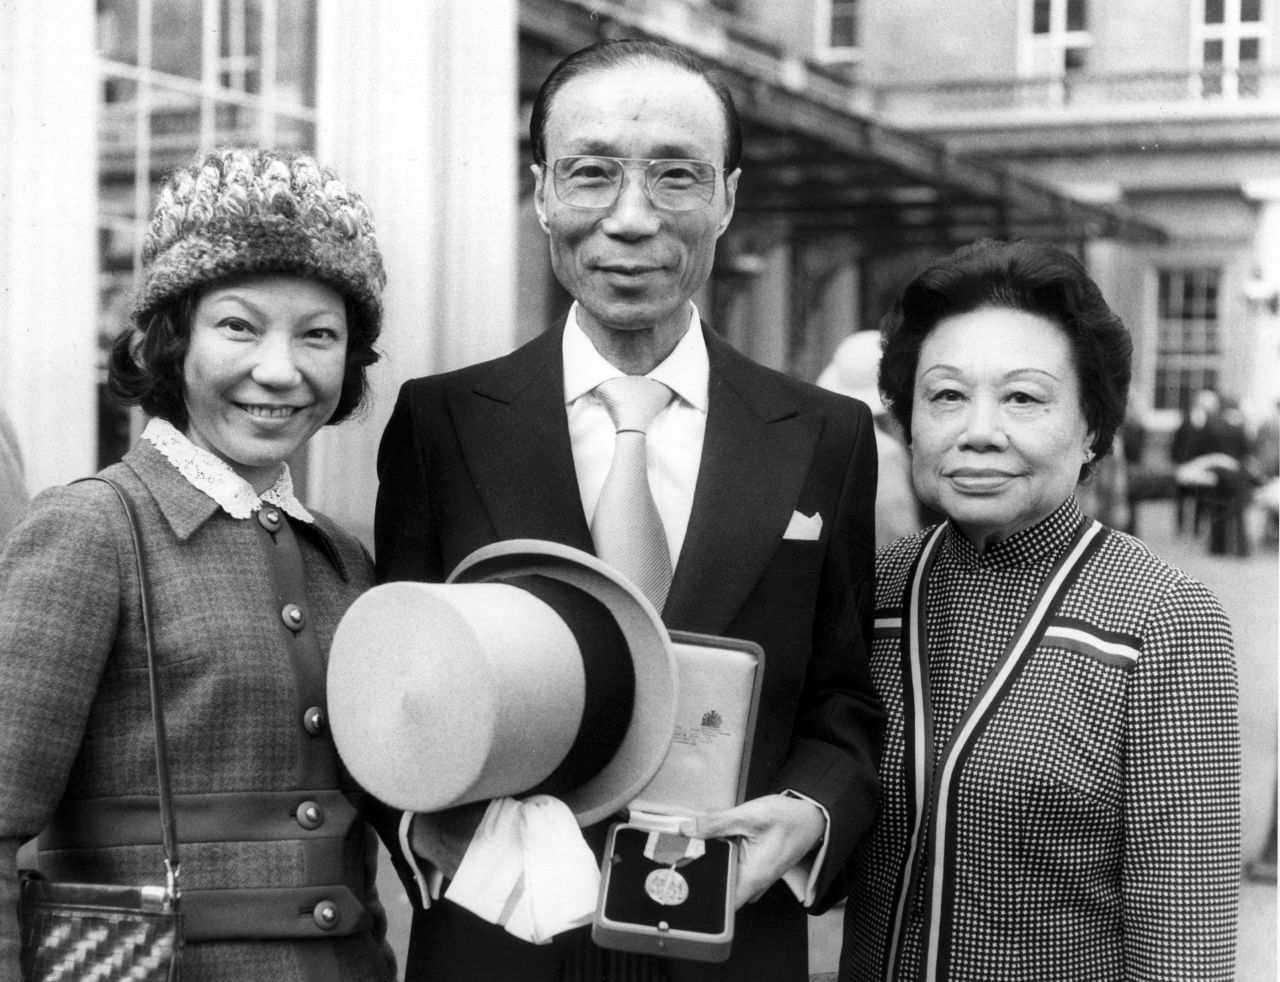 <a href="http://www.cnn.com/2014/01/07/world/asia/run-run-shaw-dies/index.html">Sir Run Run Shaw</a>, the media tycoon who helped bring Chinese martial arts films to an international audience, died at his home in Hong Kong on January 7 at age 106, the television station he founded said.